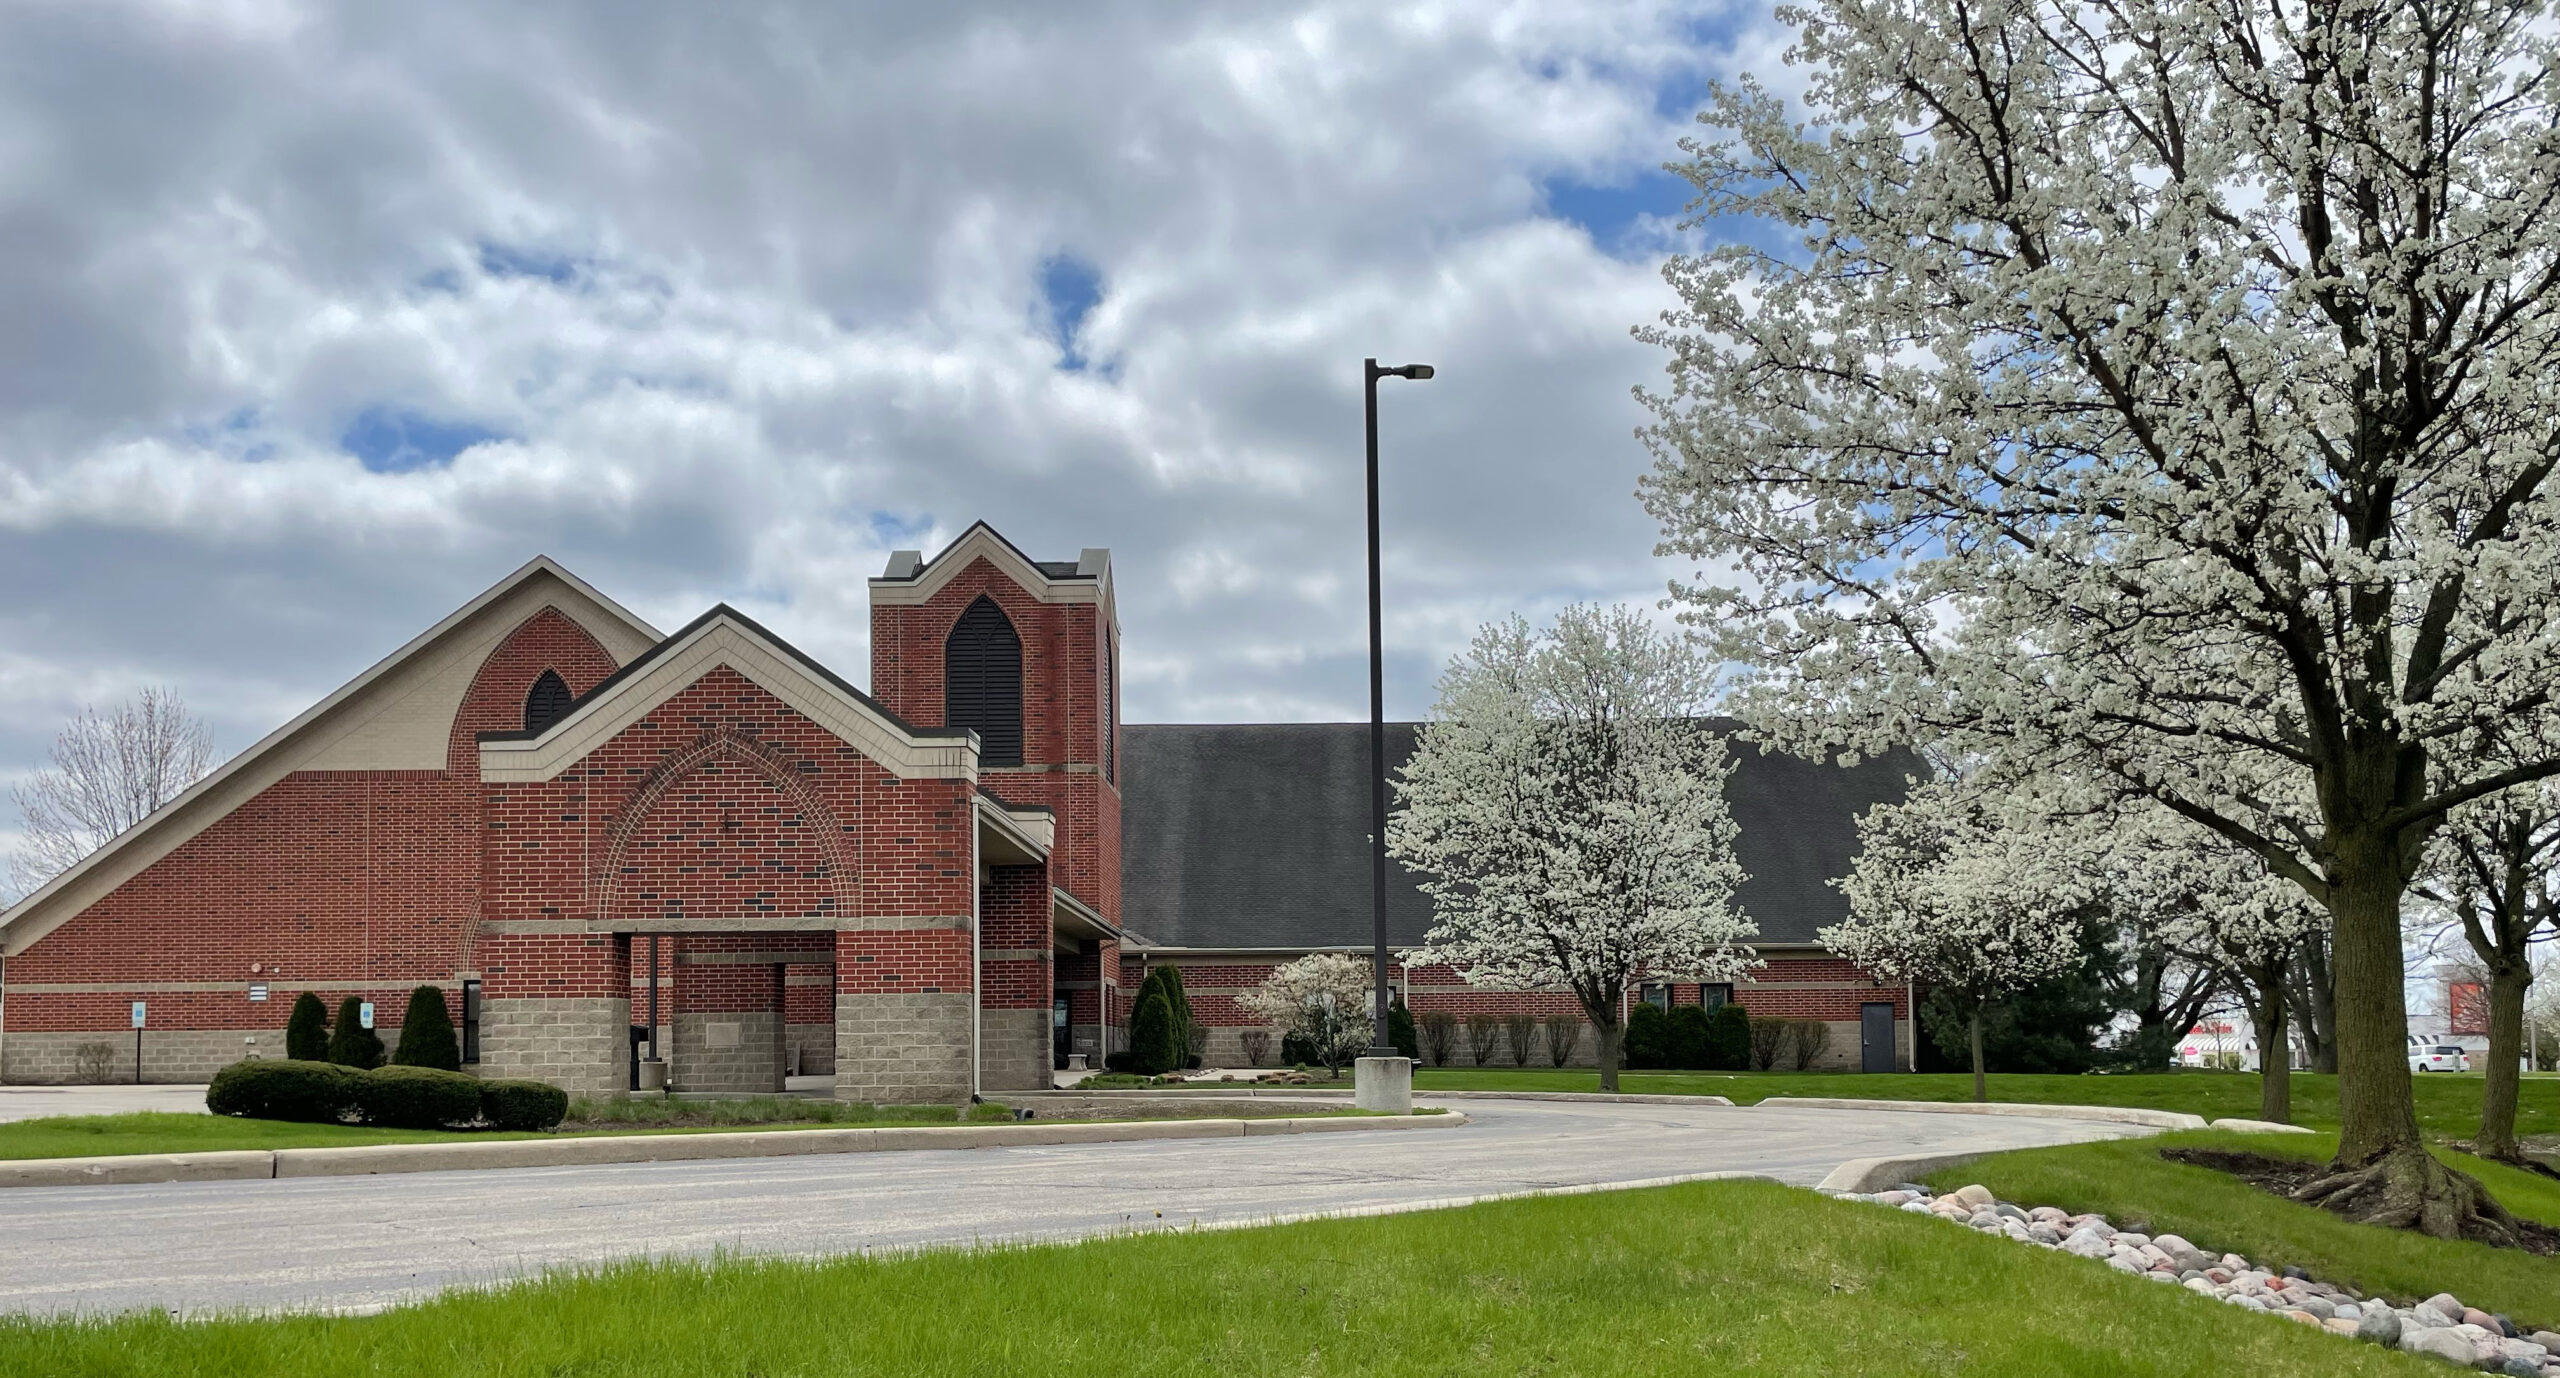 front of the church building with trees blooming in the parking lot